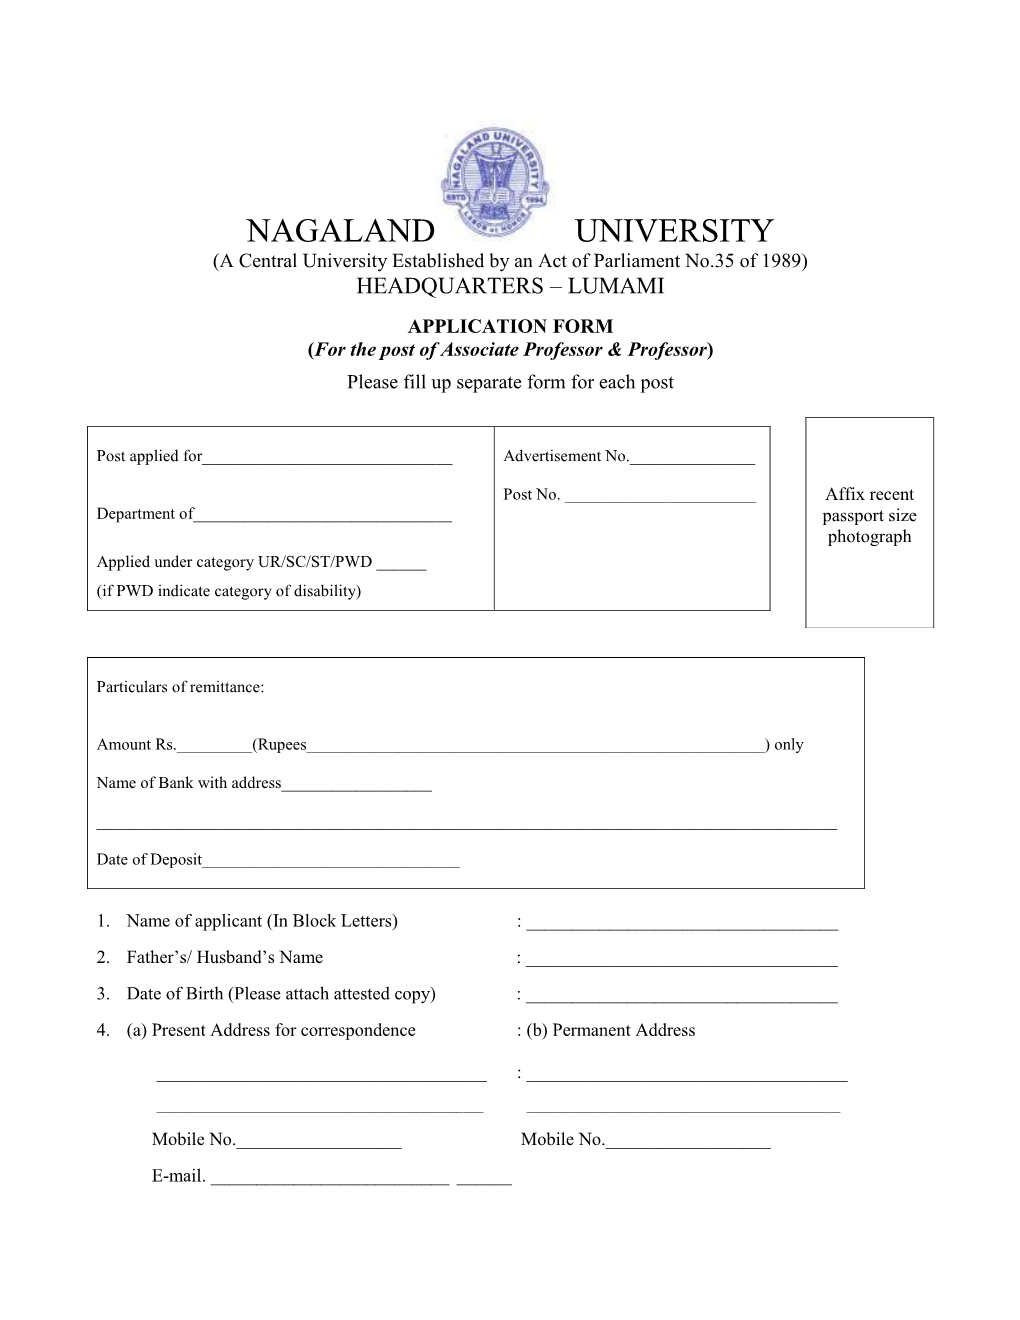 NAGALAND UNIVERSITY (A Central University Established by an Act of Parliament No.35 of 1989) HEADQUARTERS – LUMAMI